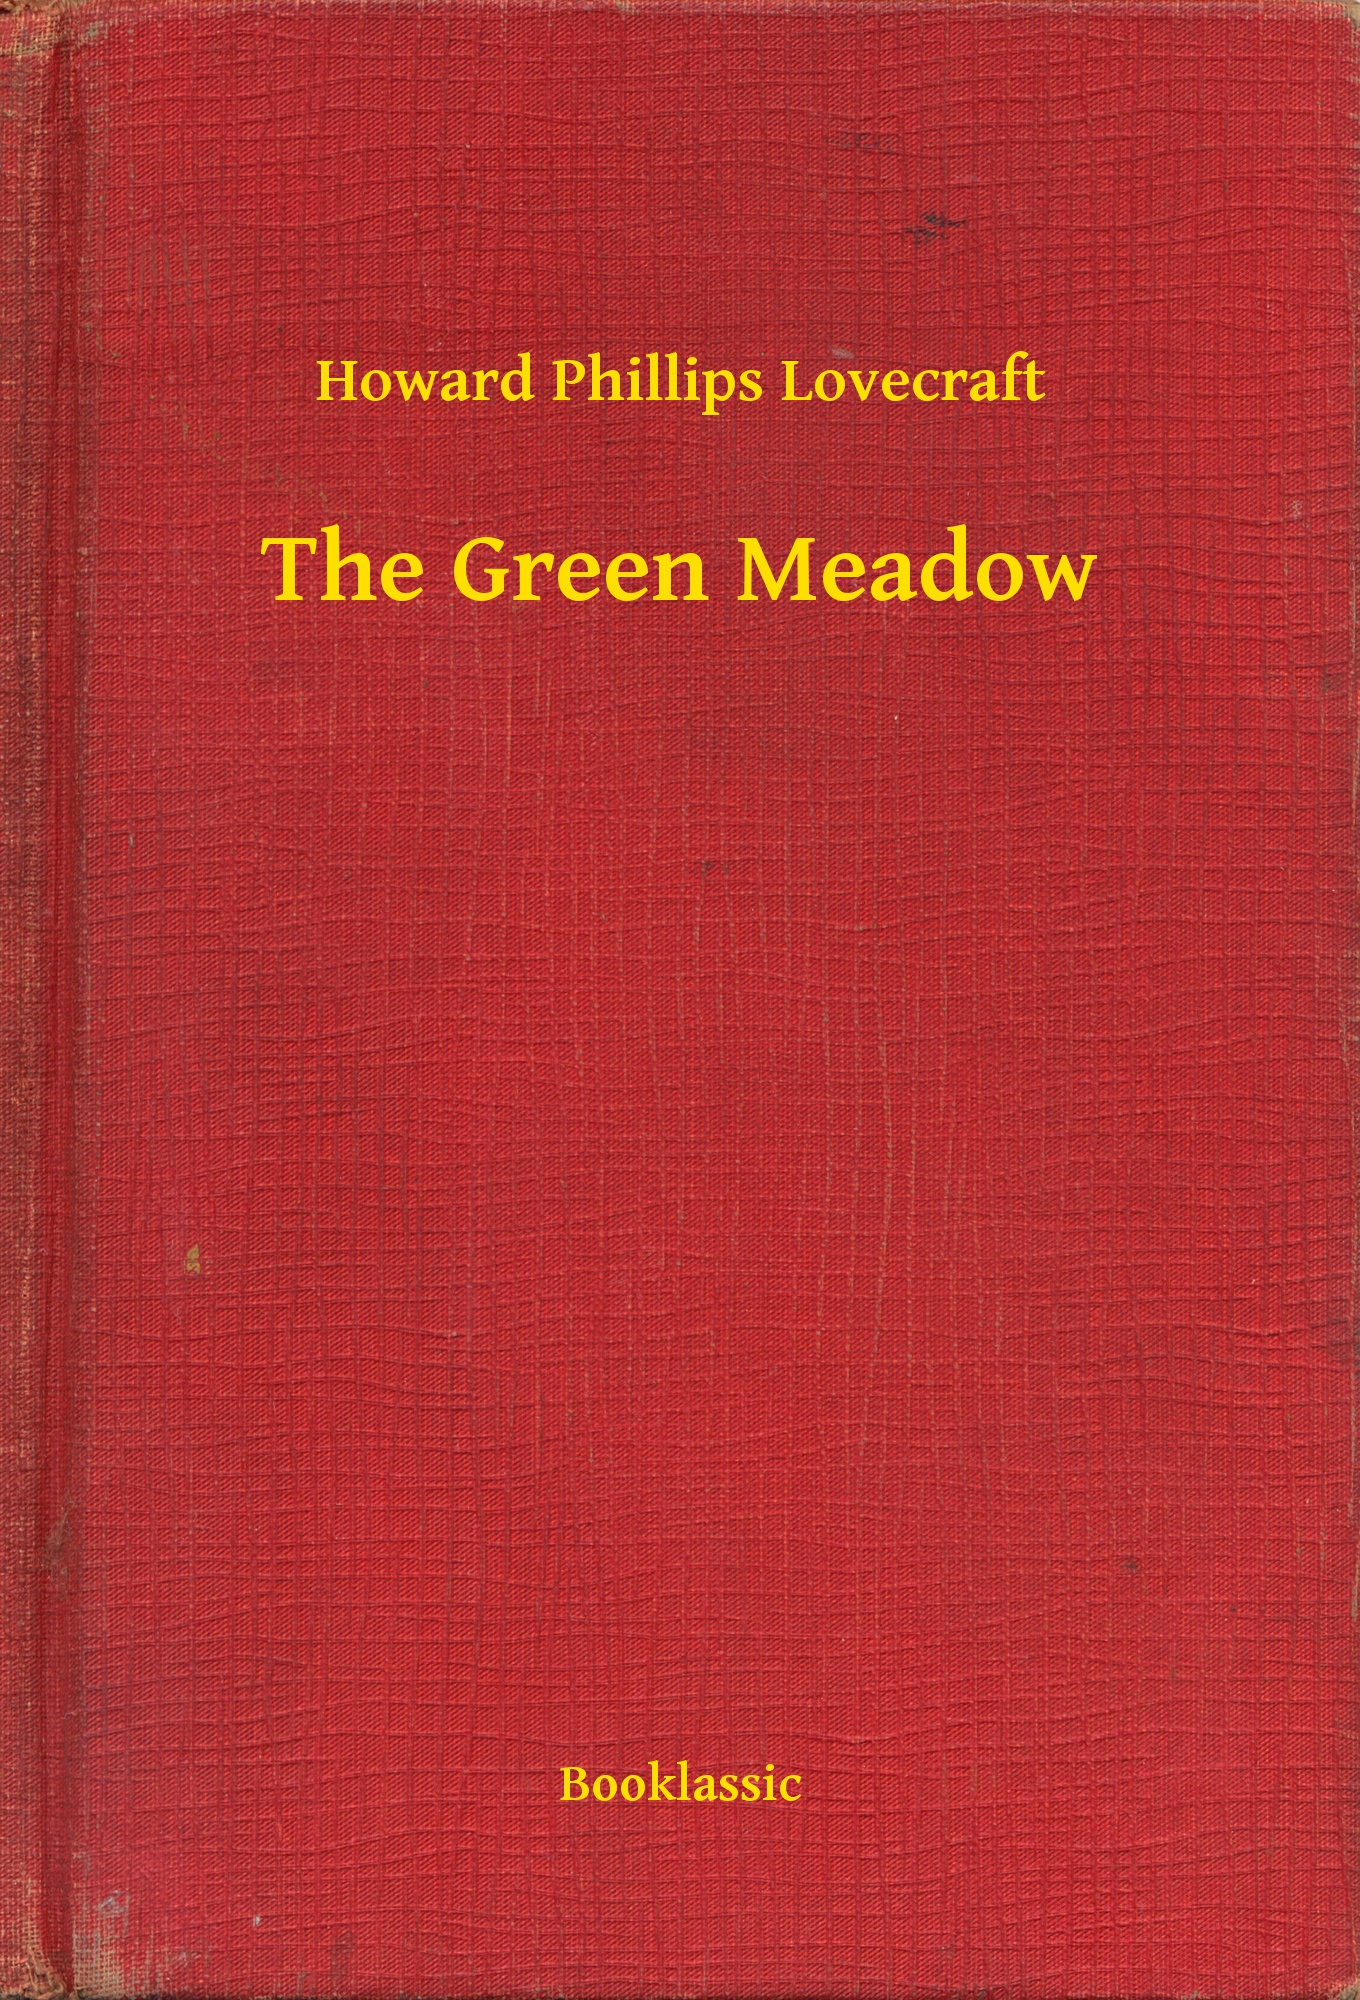 The Green Meadow